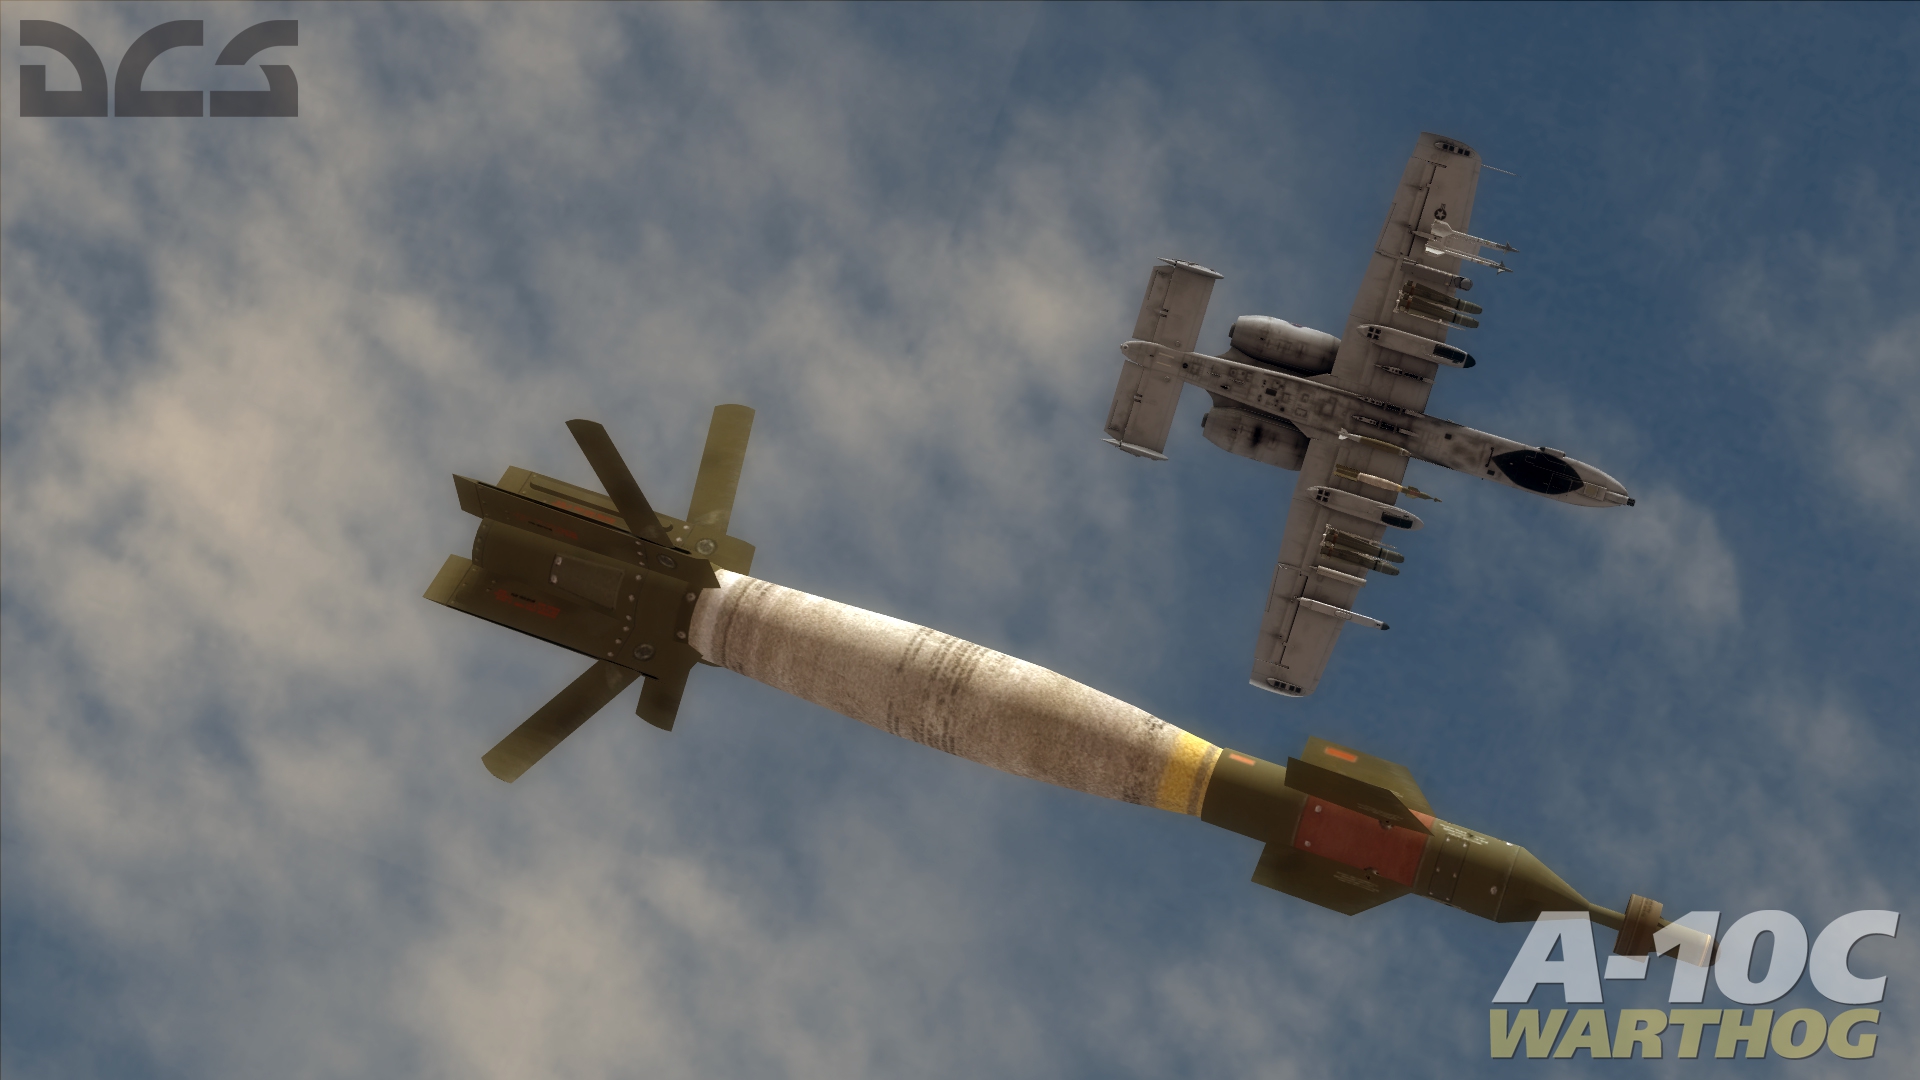 Video Game DCS: A-10C Warthog HD Wallpaper | Background Image